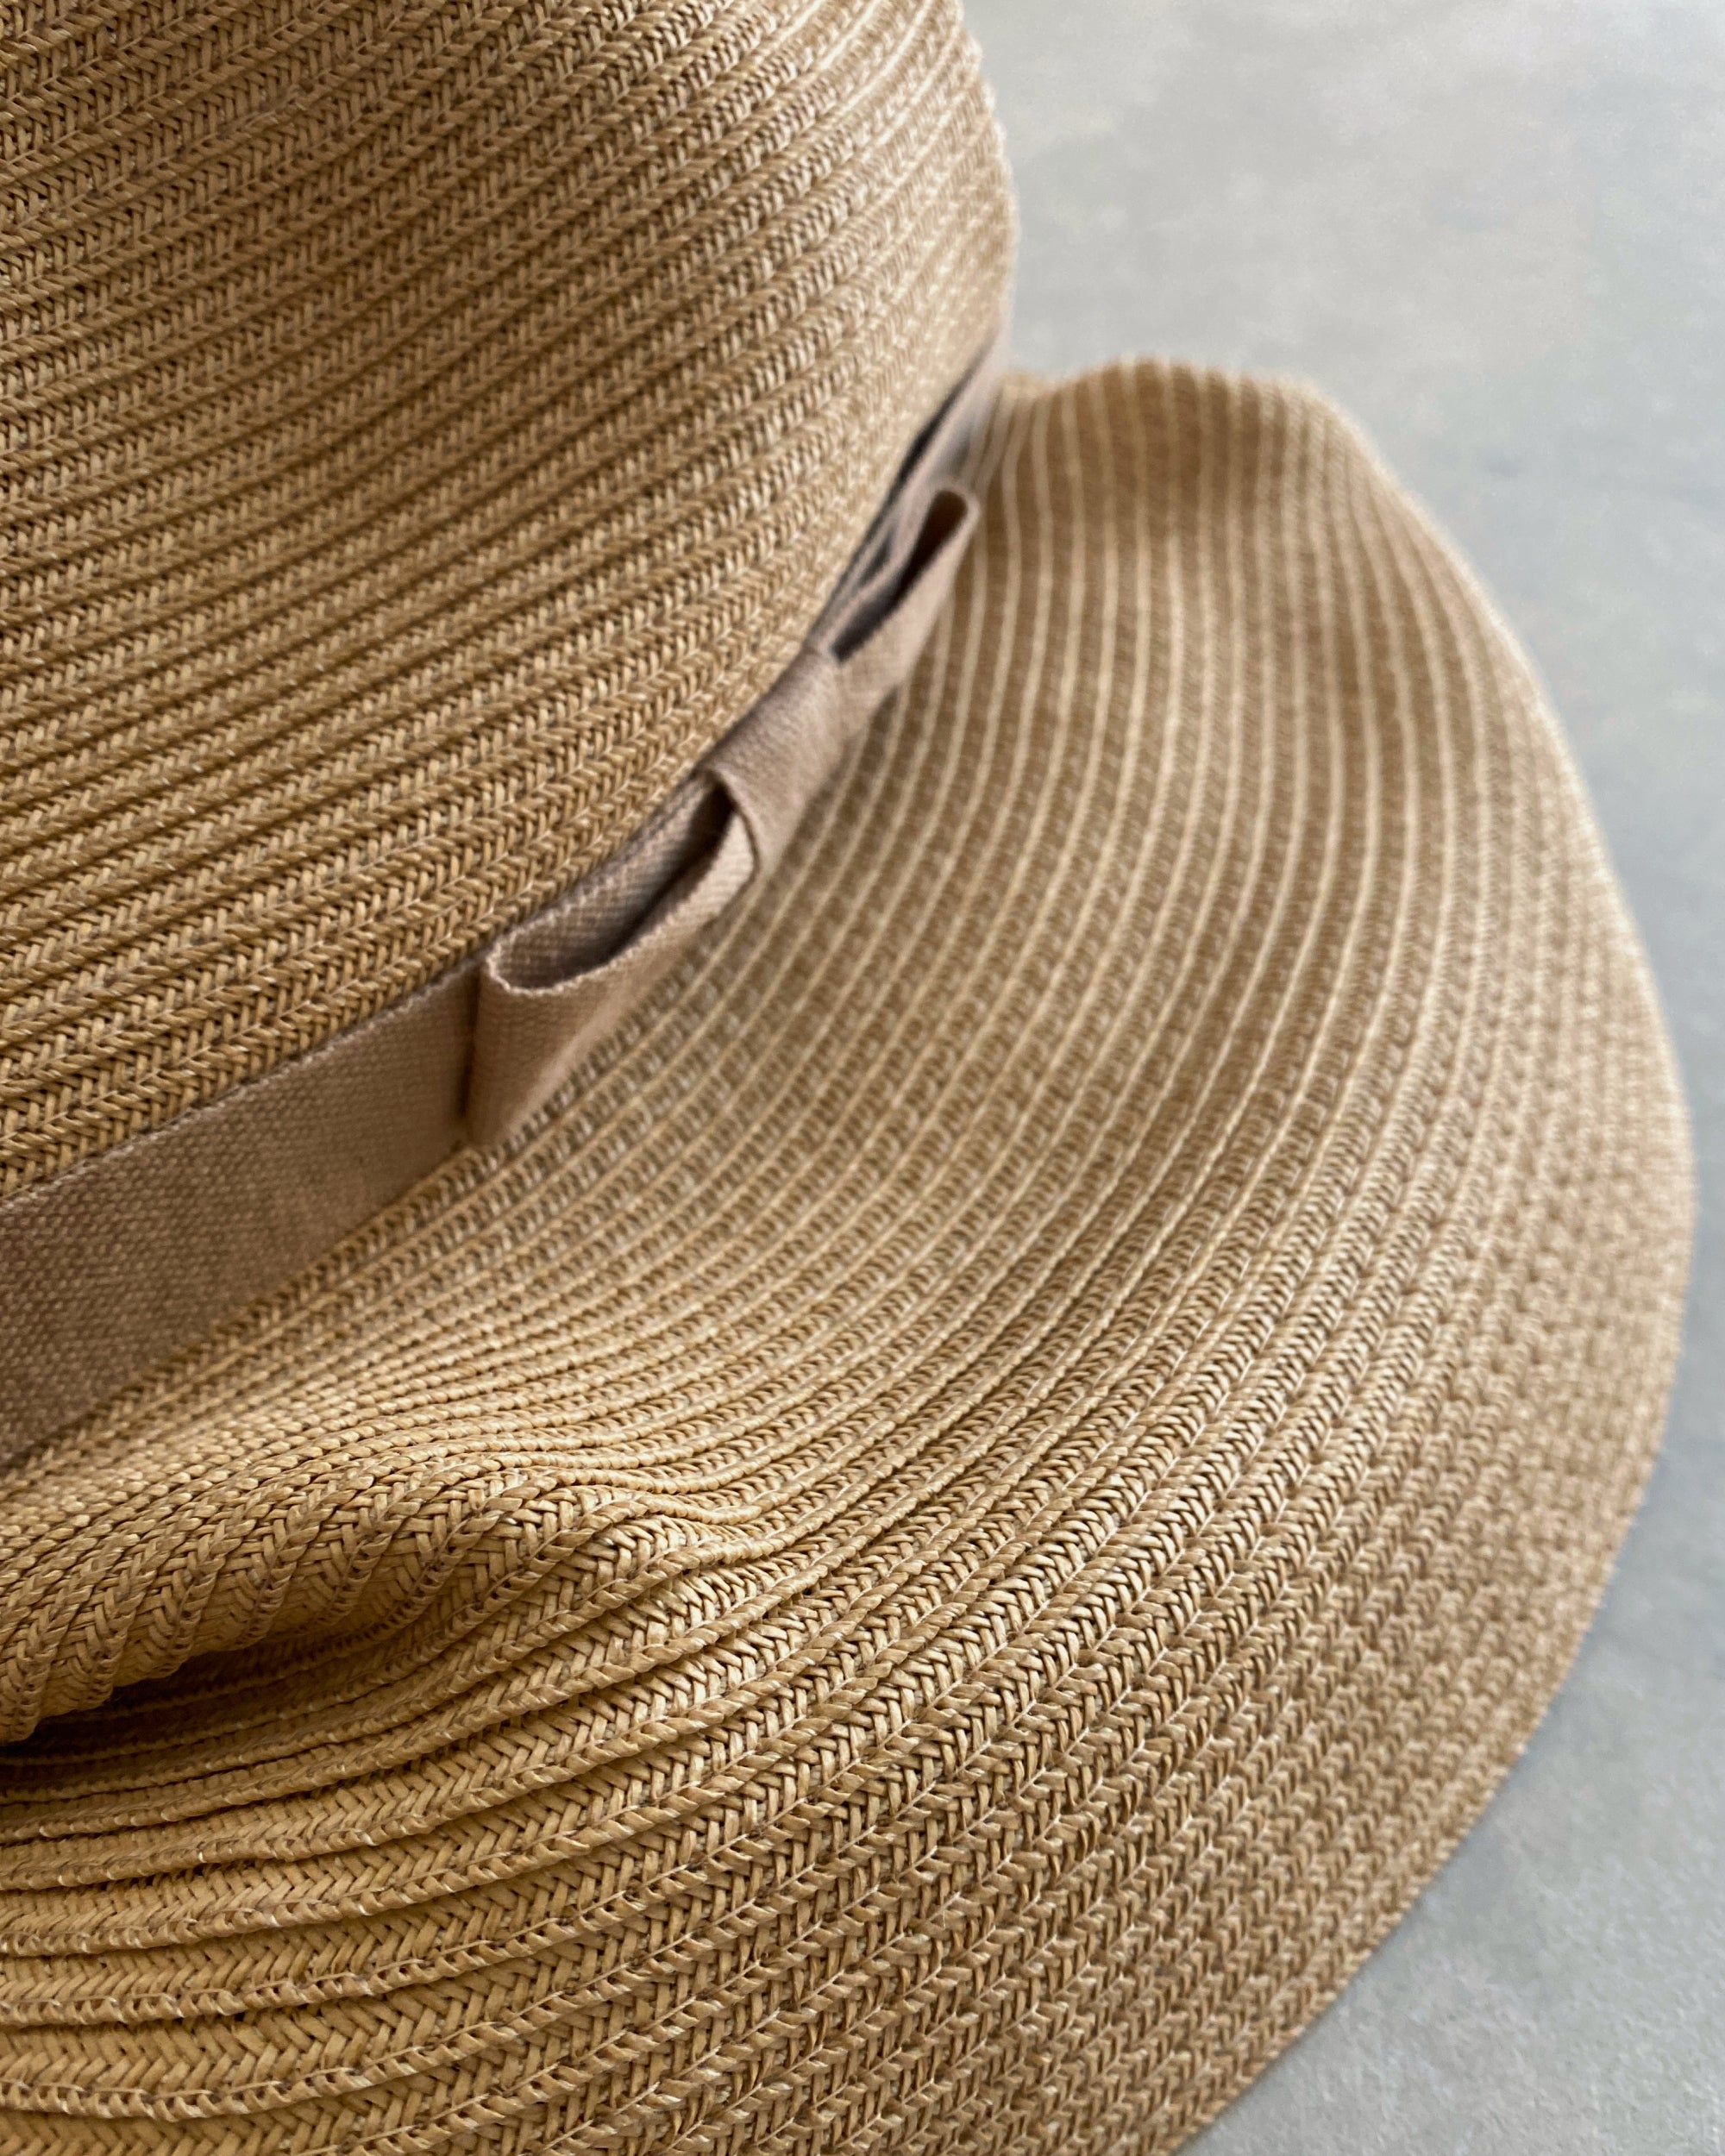 mature ha : boxed hat in sand with vanilla bean ribbon